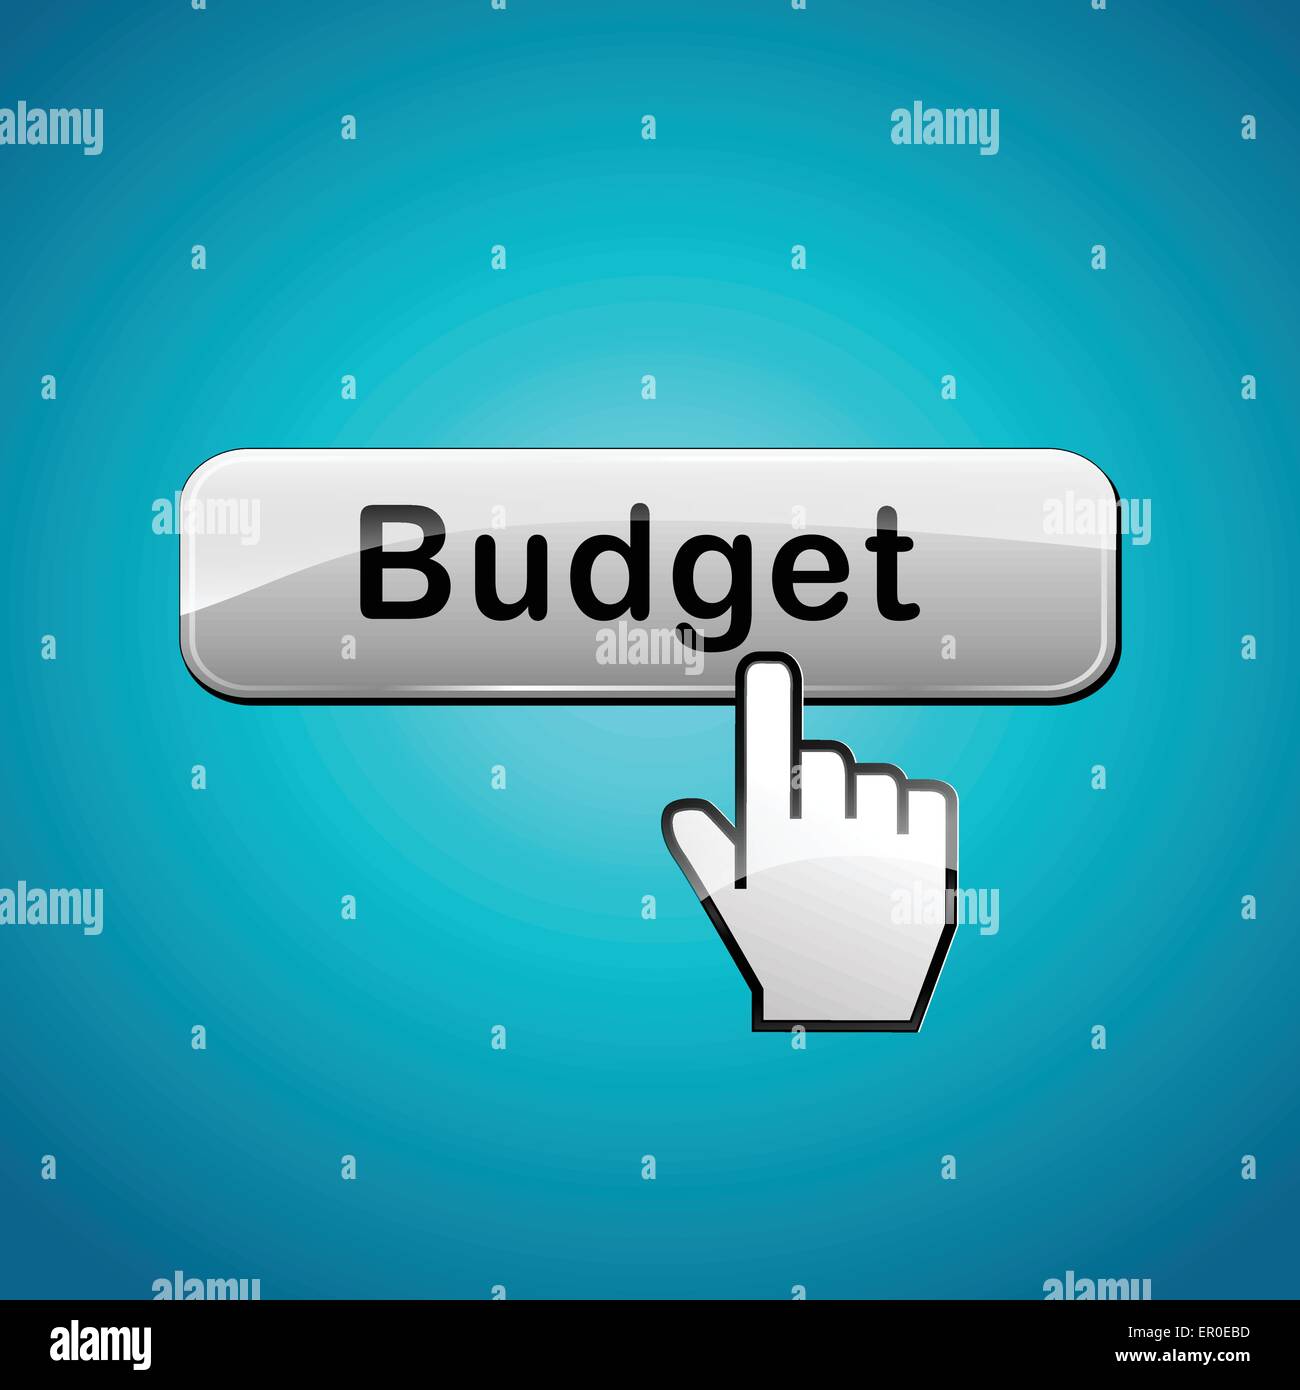 illustration of budget web button abstract concept Stock Vector